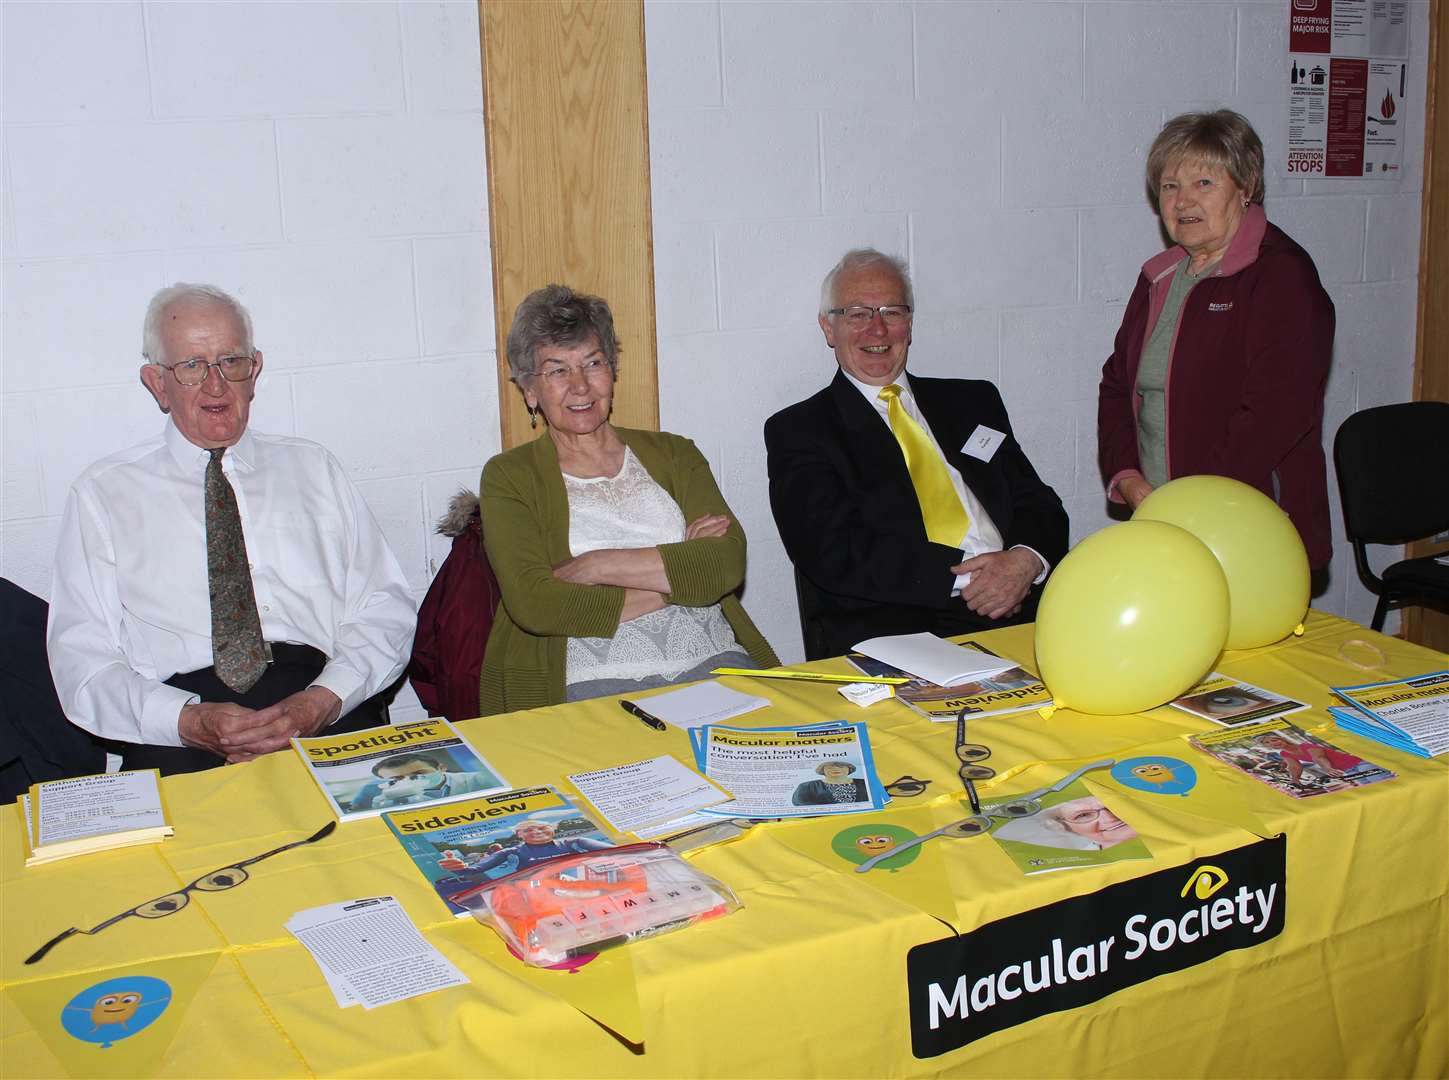 Caithness Macular Support Group representatives at last year's Caithness Health and Wellbeing Market in Wick.